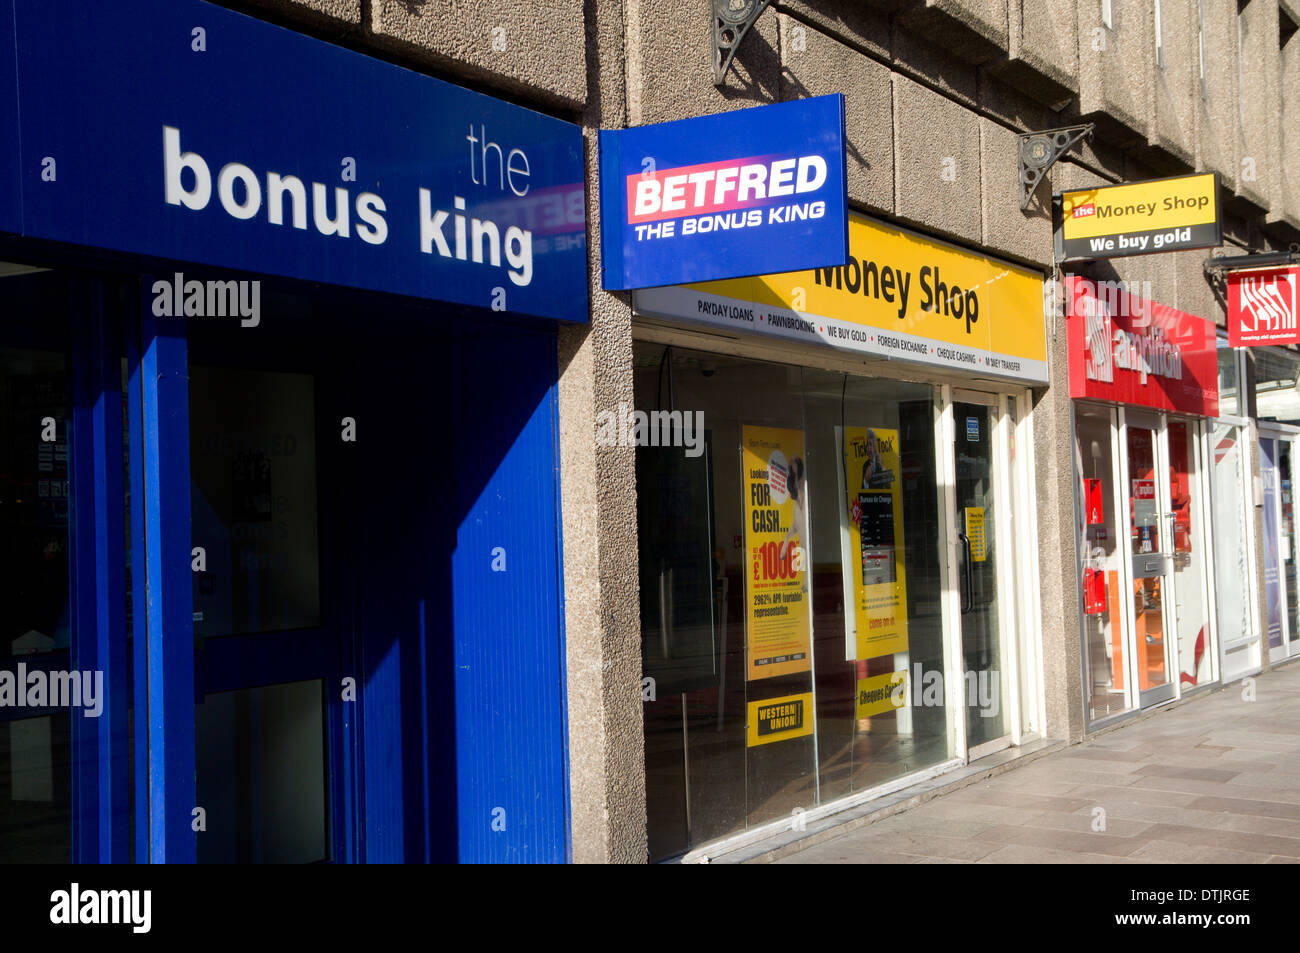 Bet Fred Betting Shop, Cardiff City Centre, Wales. Stockfoto